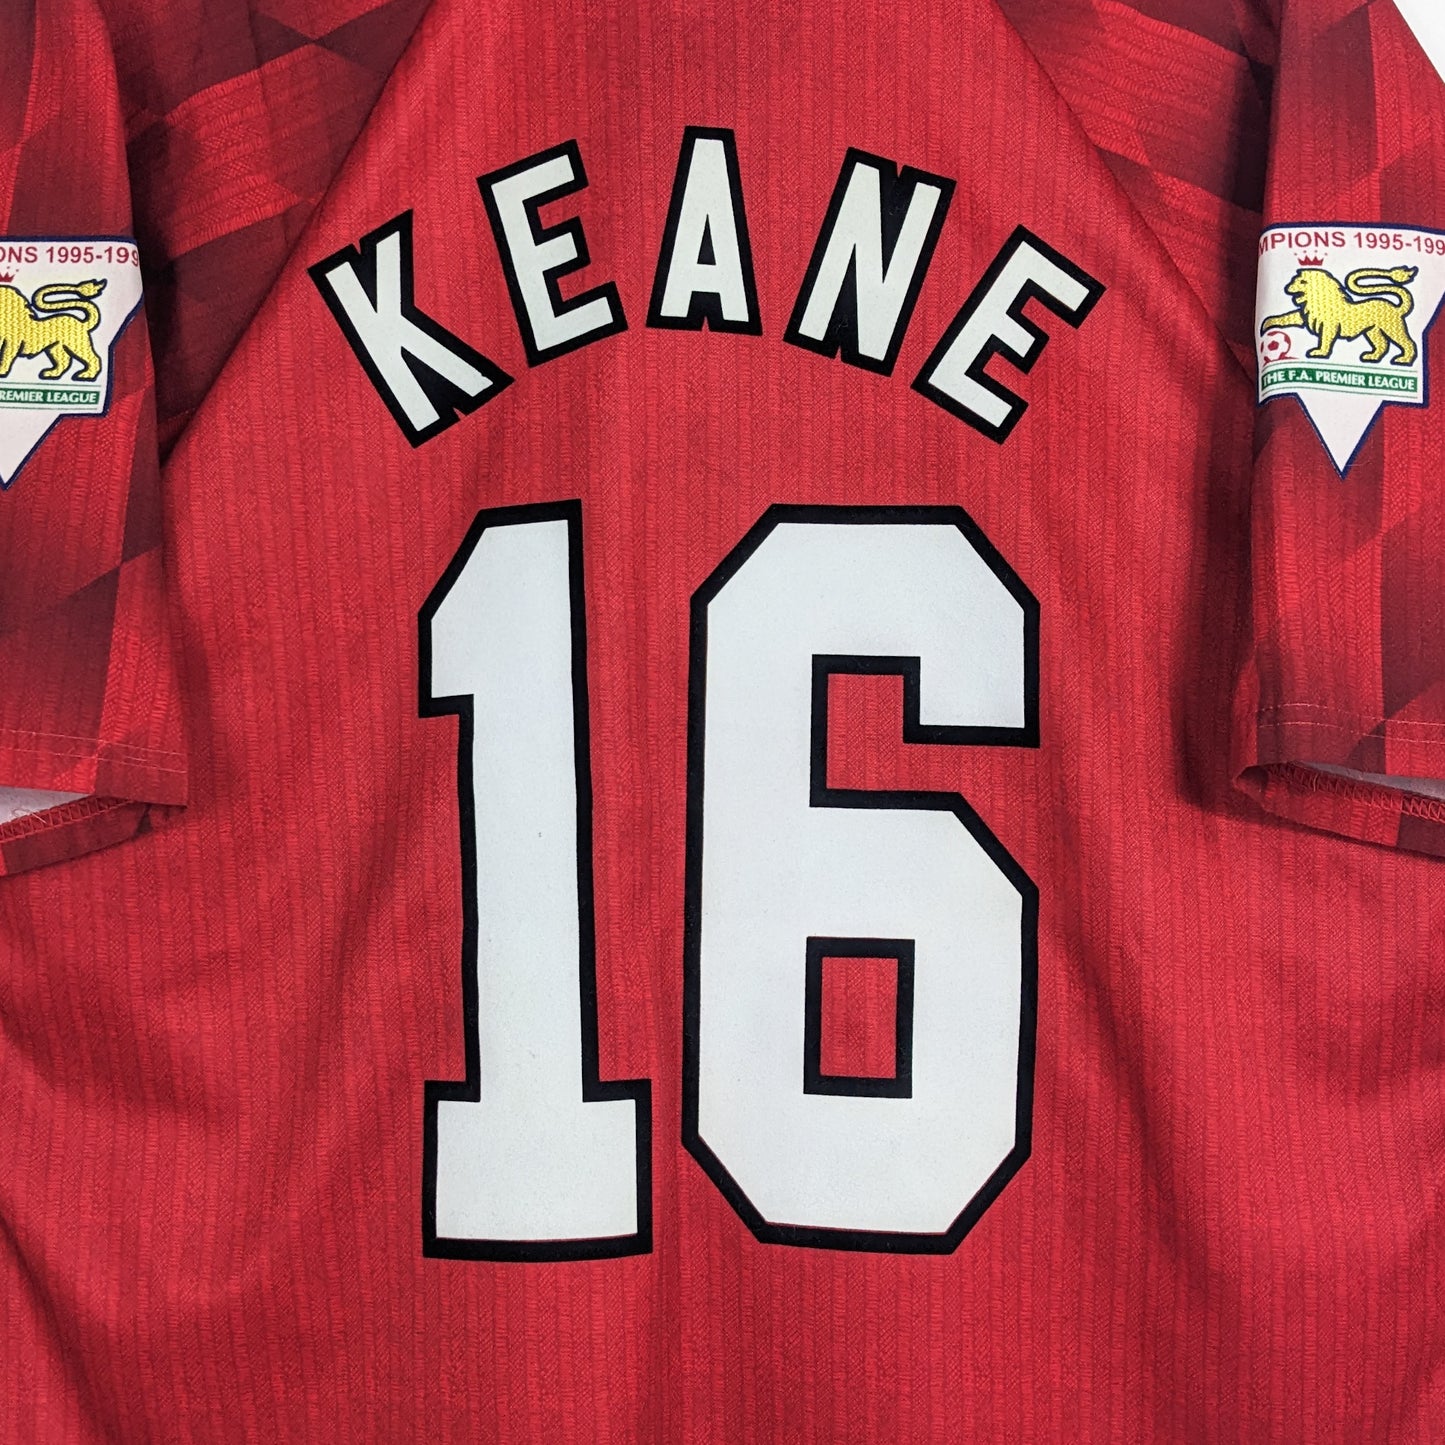 Authentic Manchester United 1996 Home - Keane #16 Size L